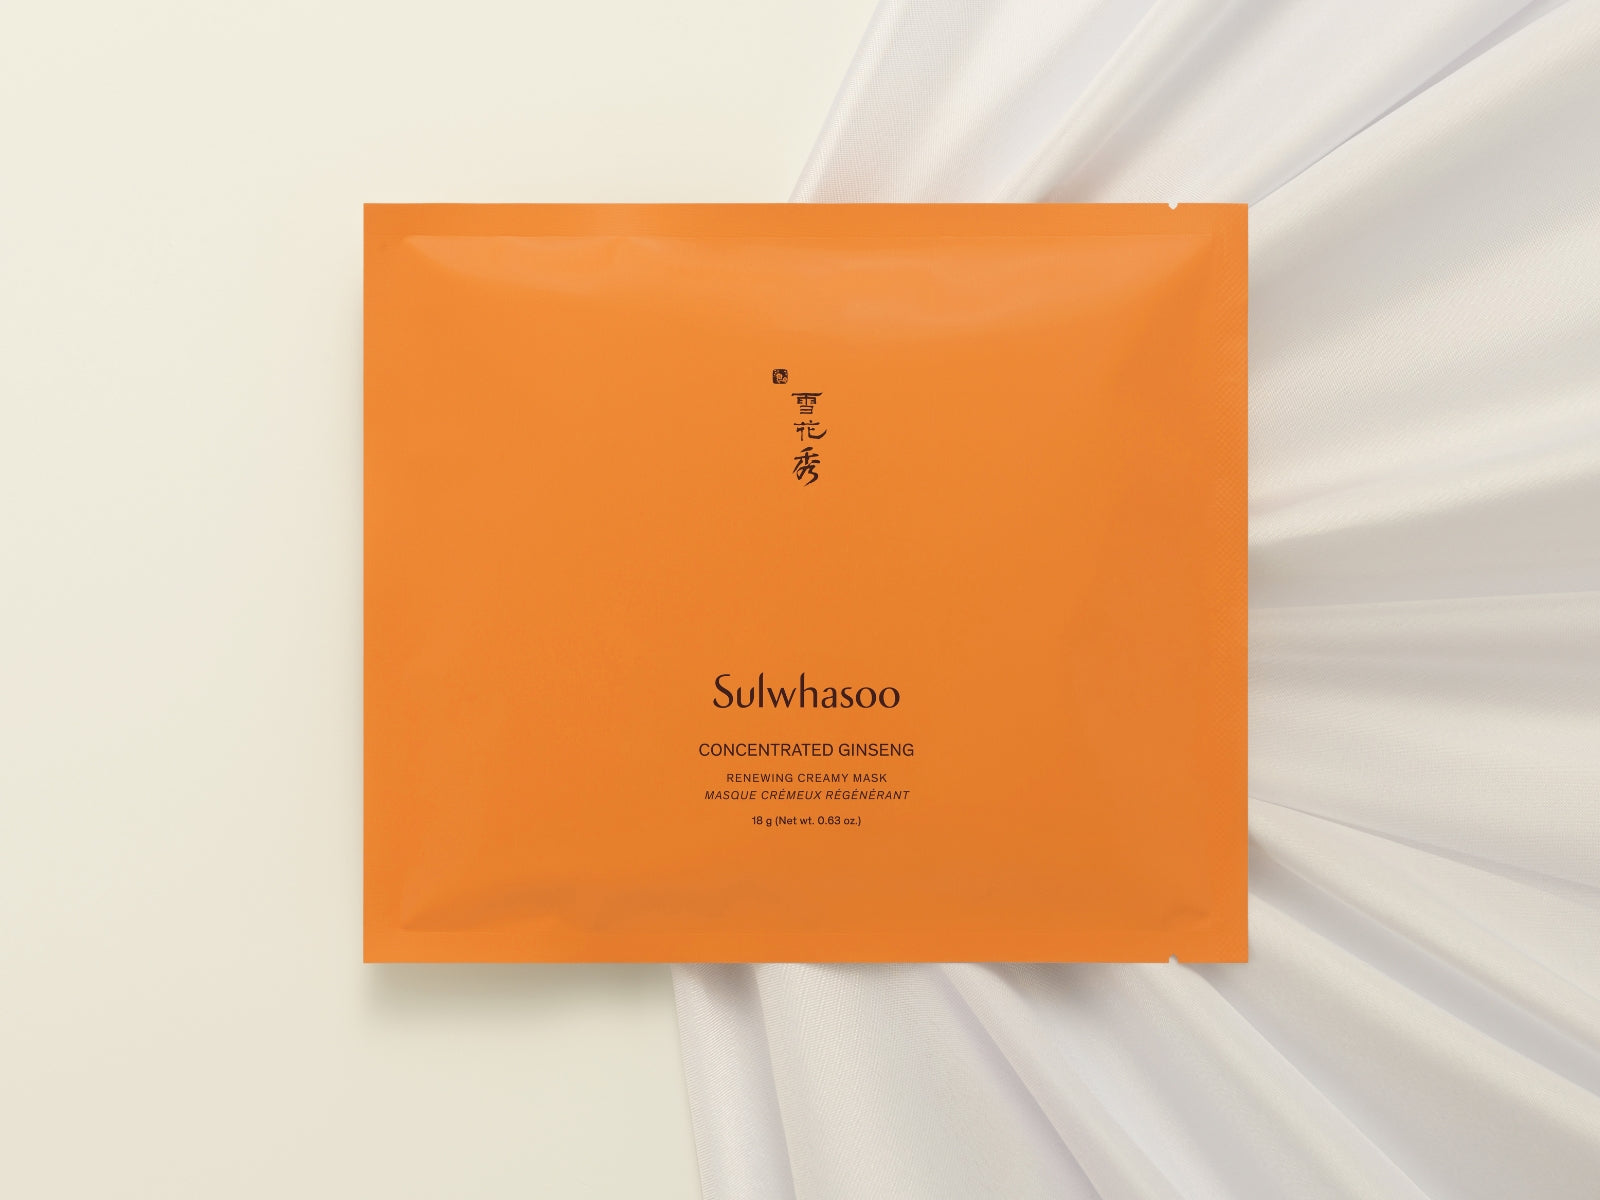 Sulwhasoo Concentrated Ginseng Renewing Creamy Mask EX Korean Beauty